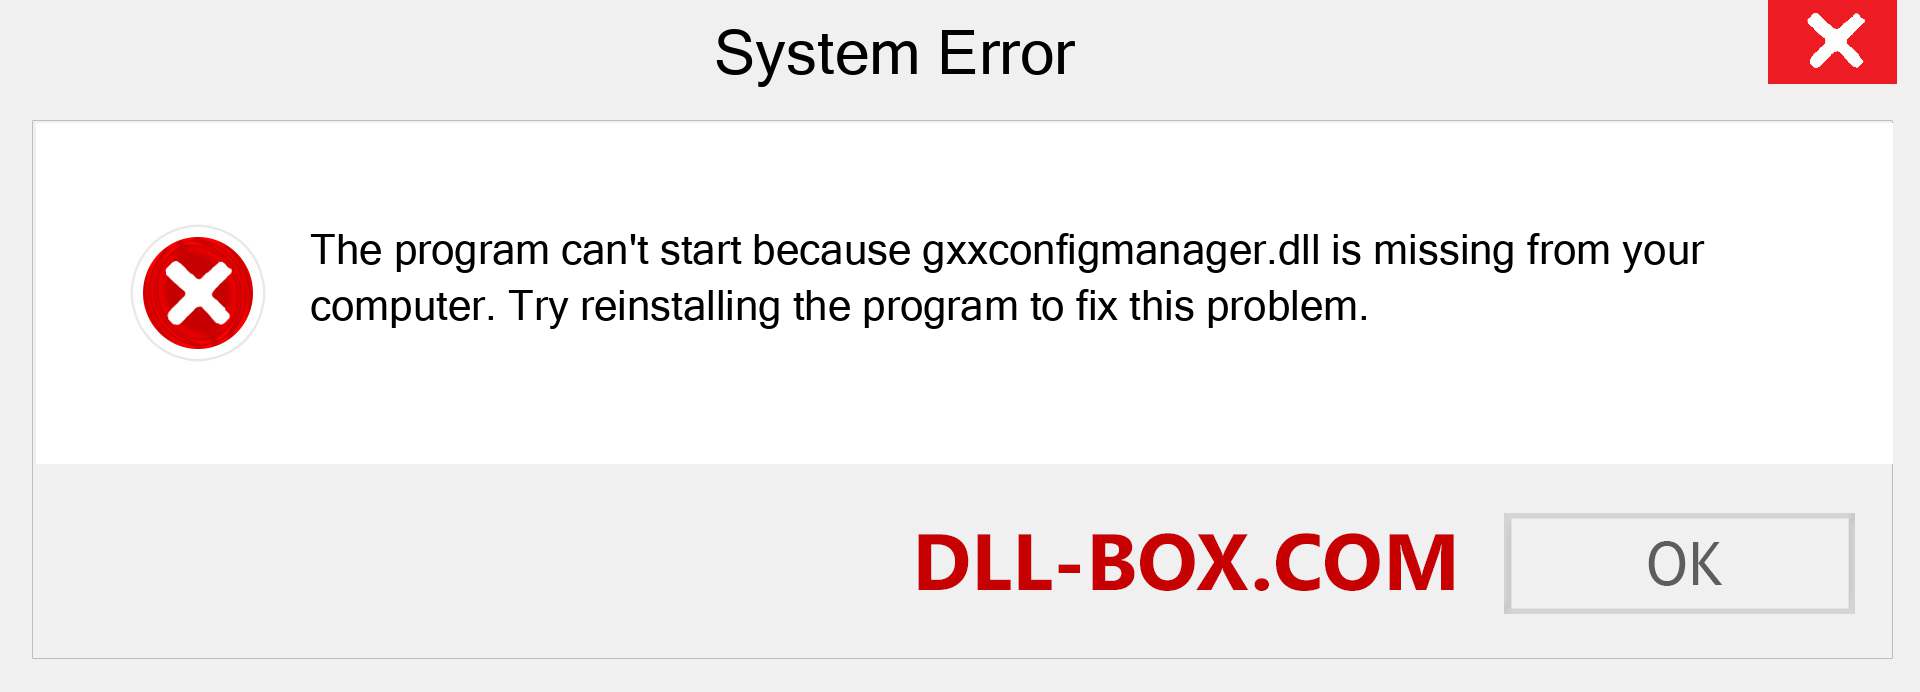  gxxconfigmanager.dll file is missing?. Download for Windows 7, 8, 10 - Fix  gxxconfigmanager dll Missing Error on Windows, photos, images